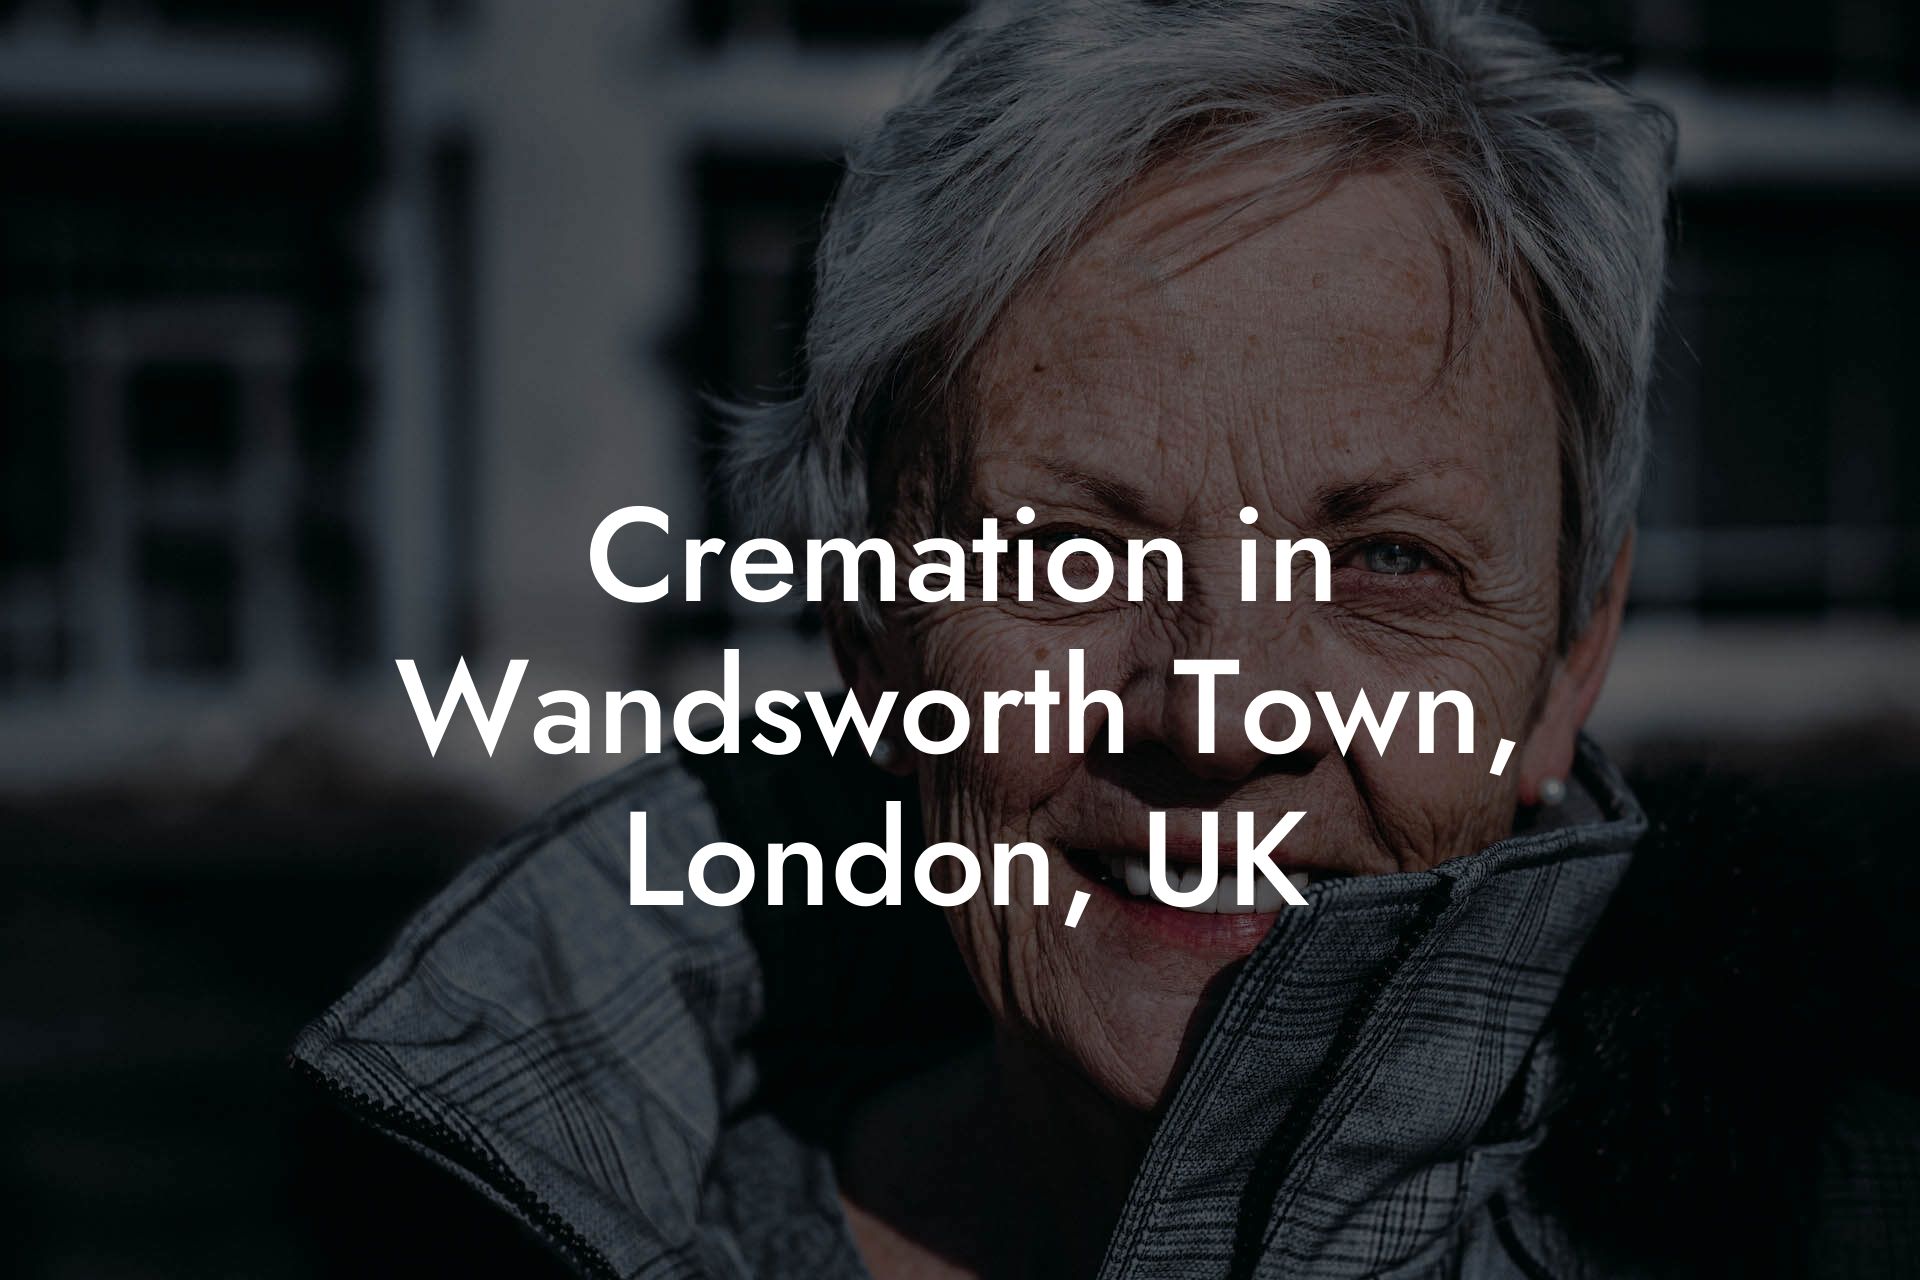 Cremation in Wandsworth Town, London, UK